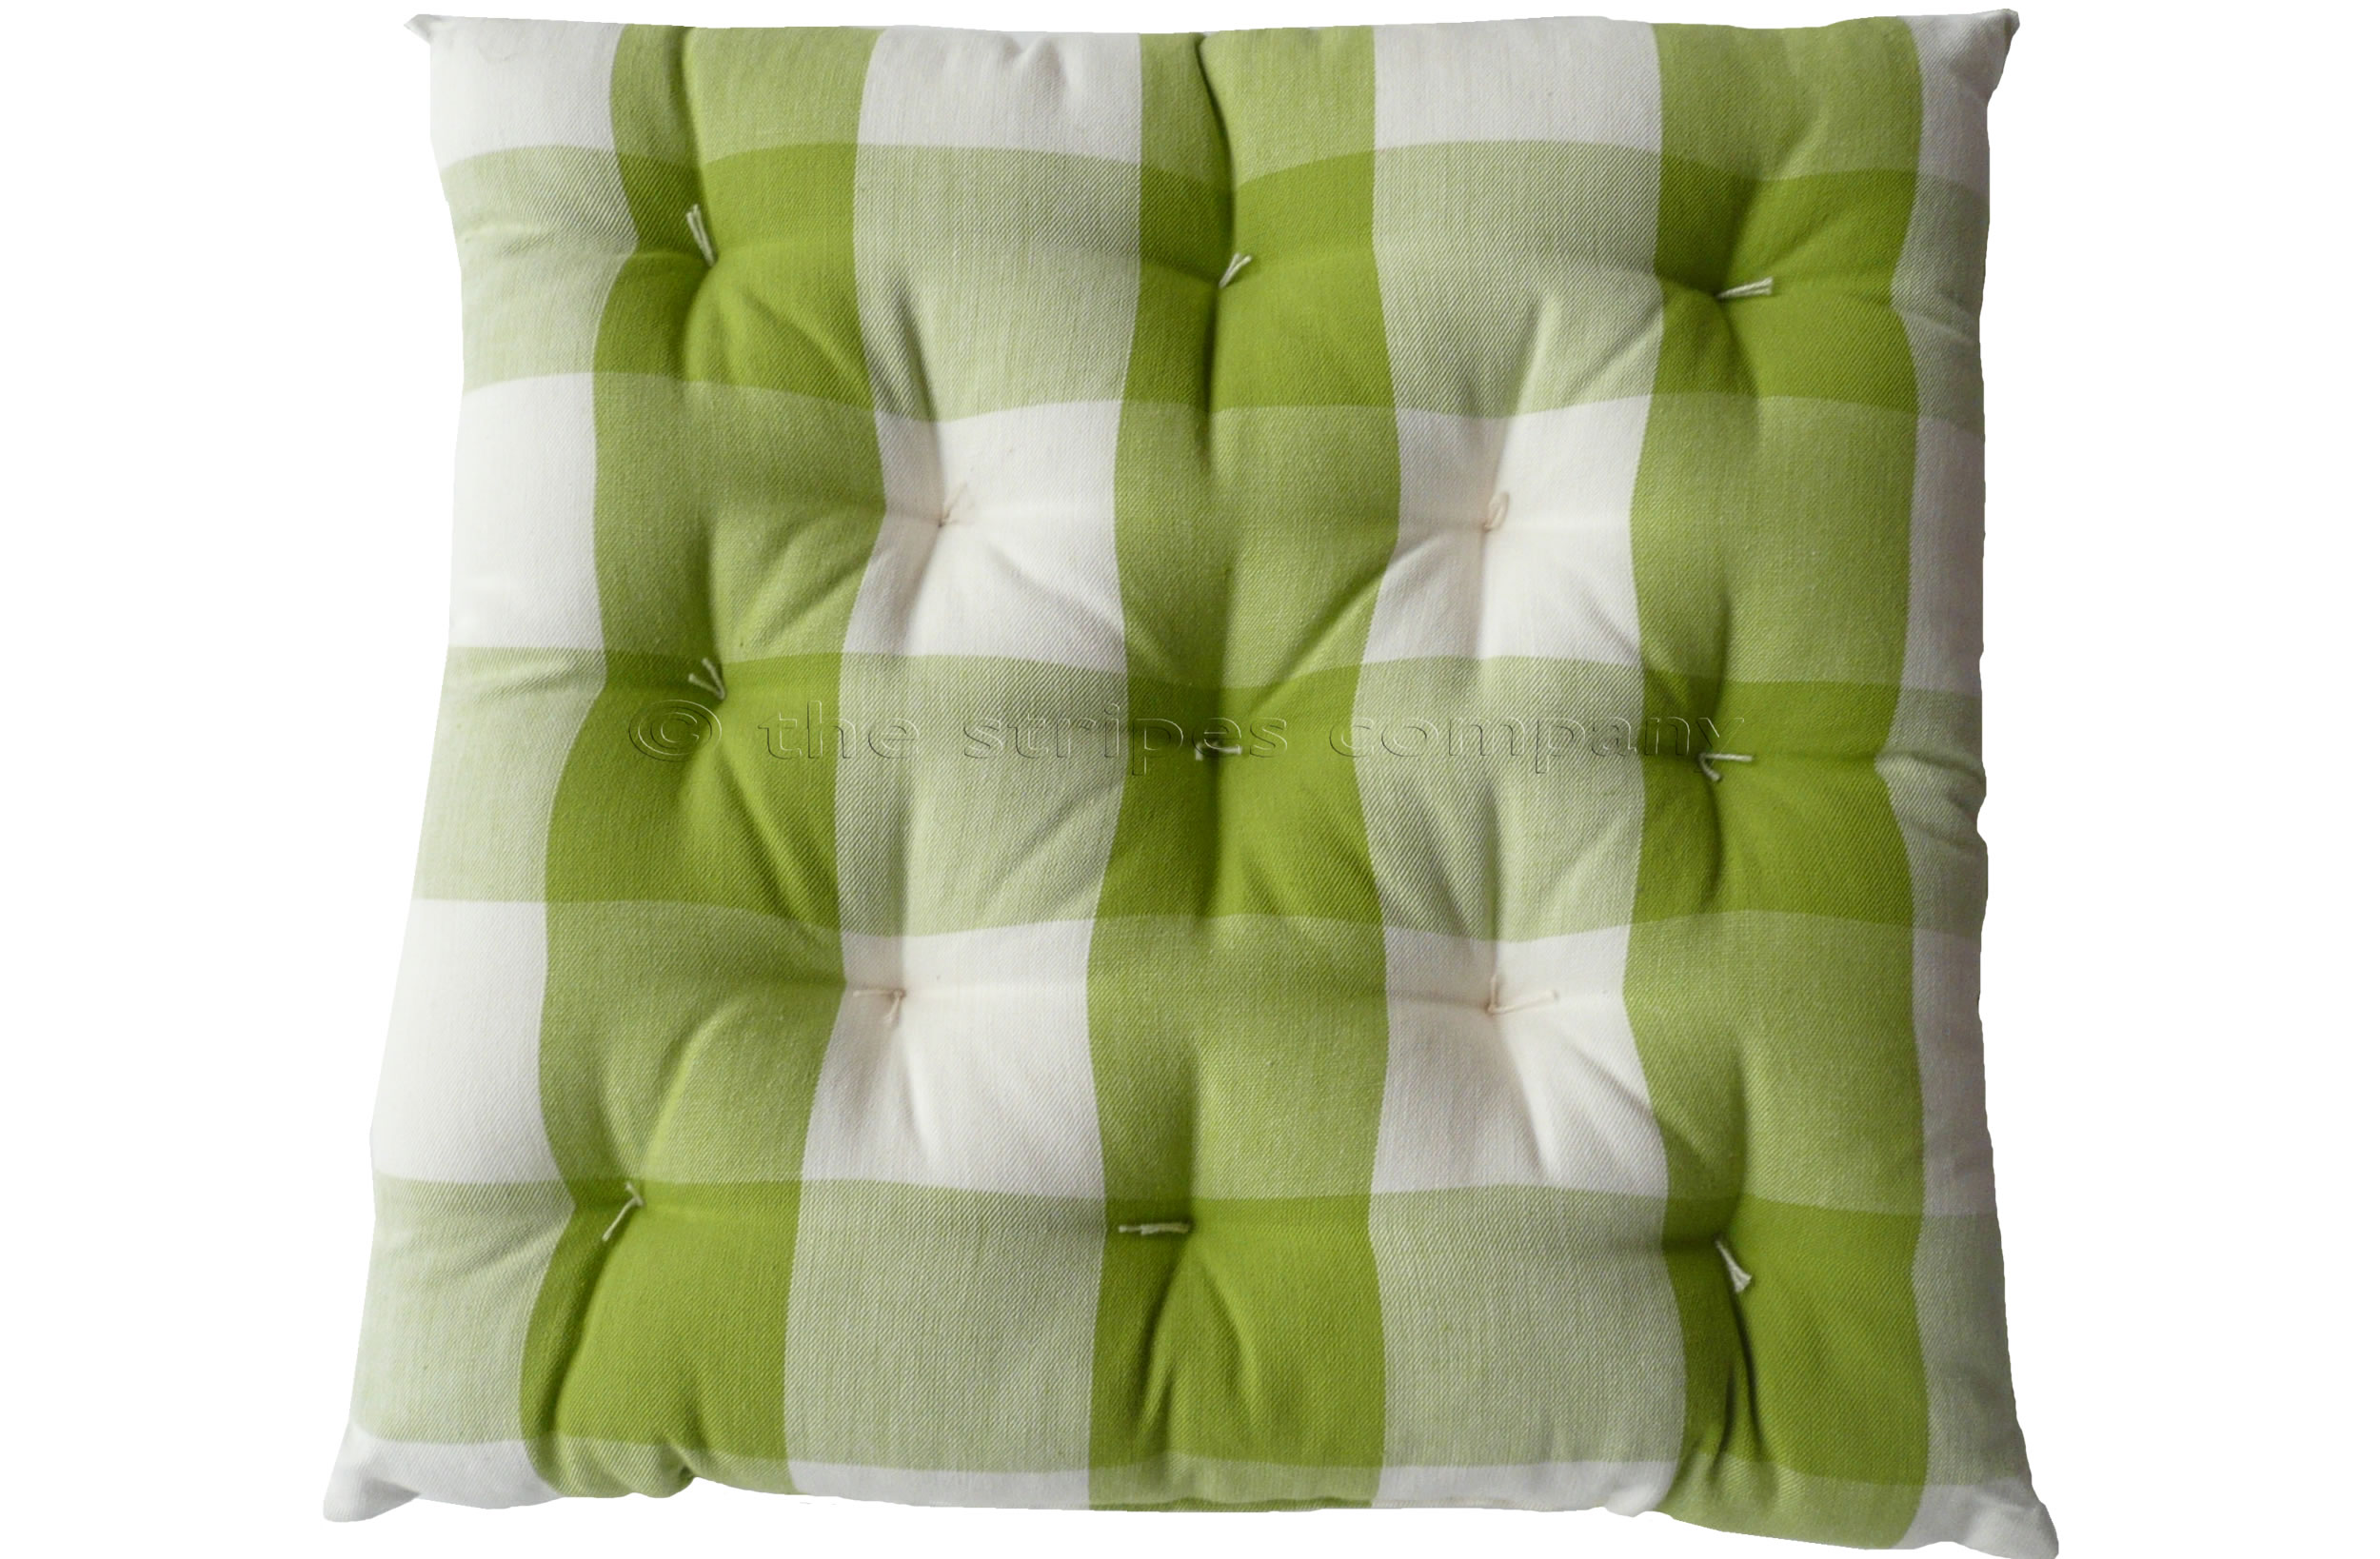 Gingham Seat Pads | Green and White Large Check Chair Cushions | Vichy Check Seat Pads